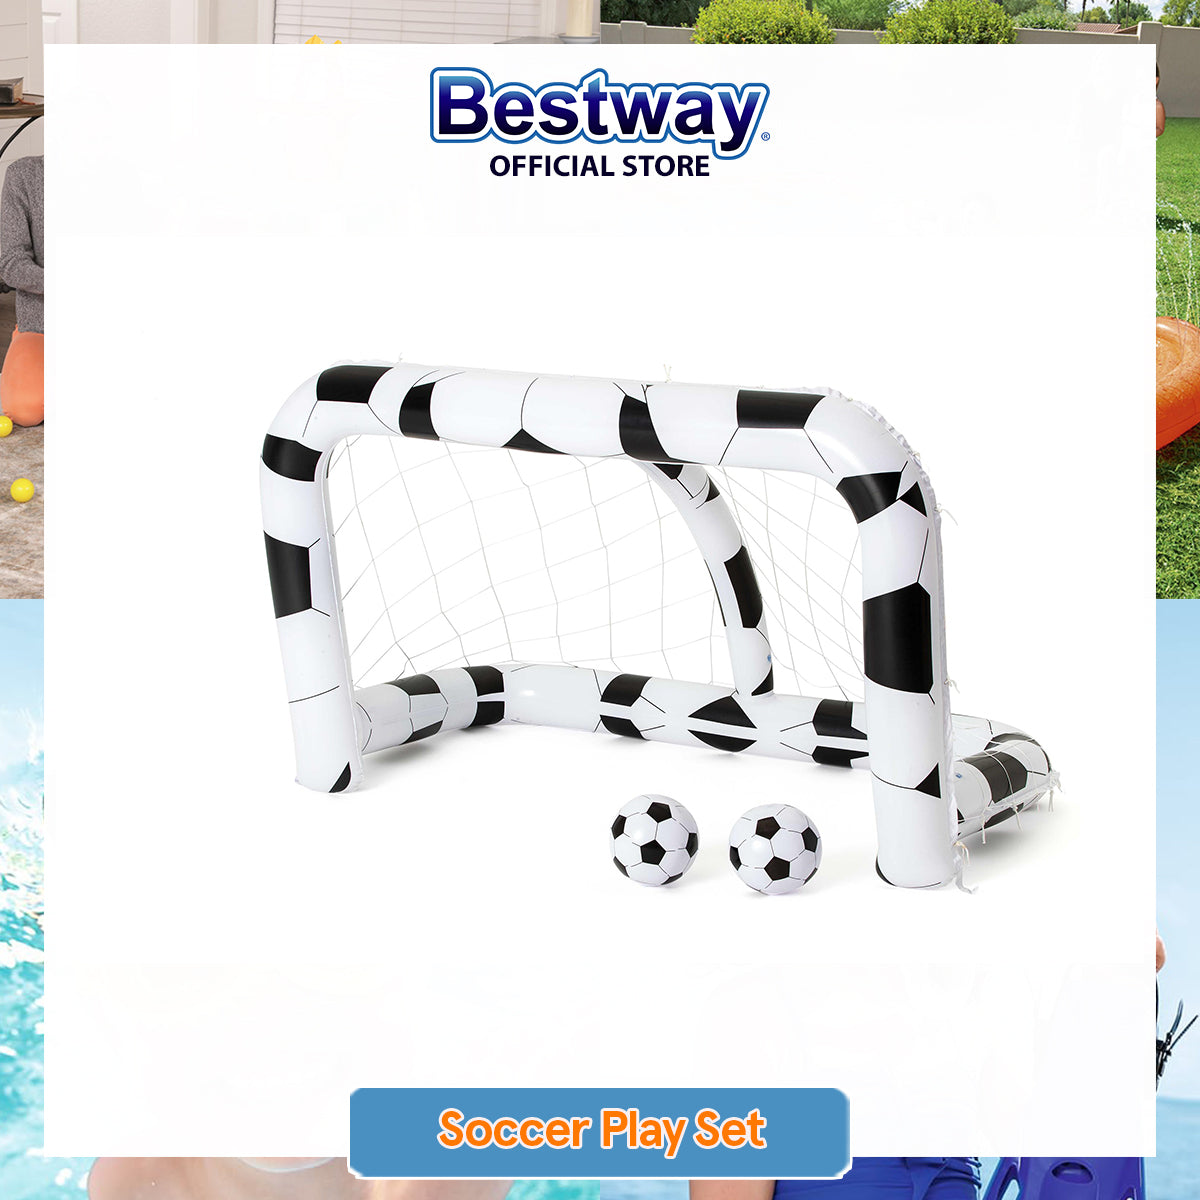 Bestway Inflatable Soccer Play Set